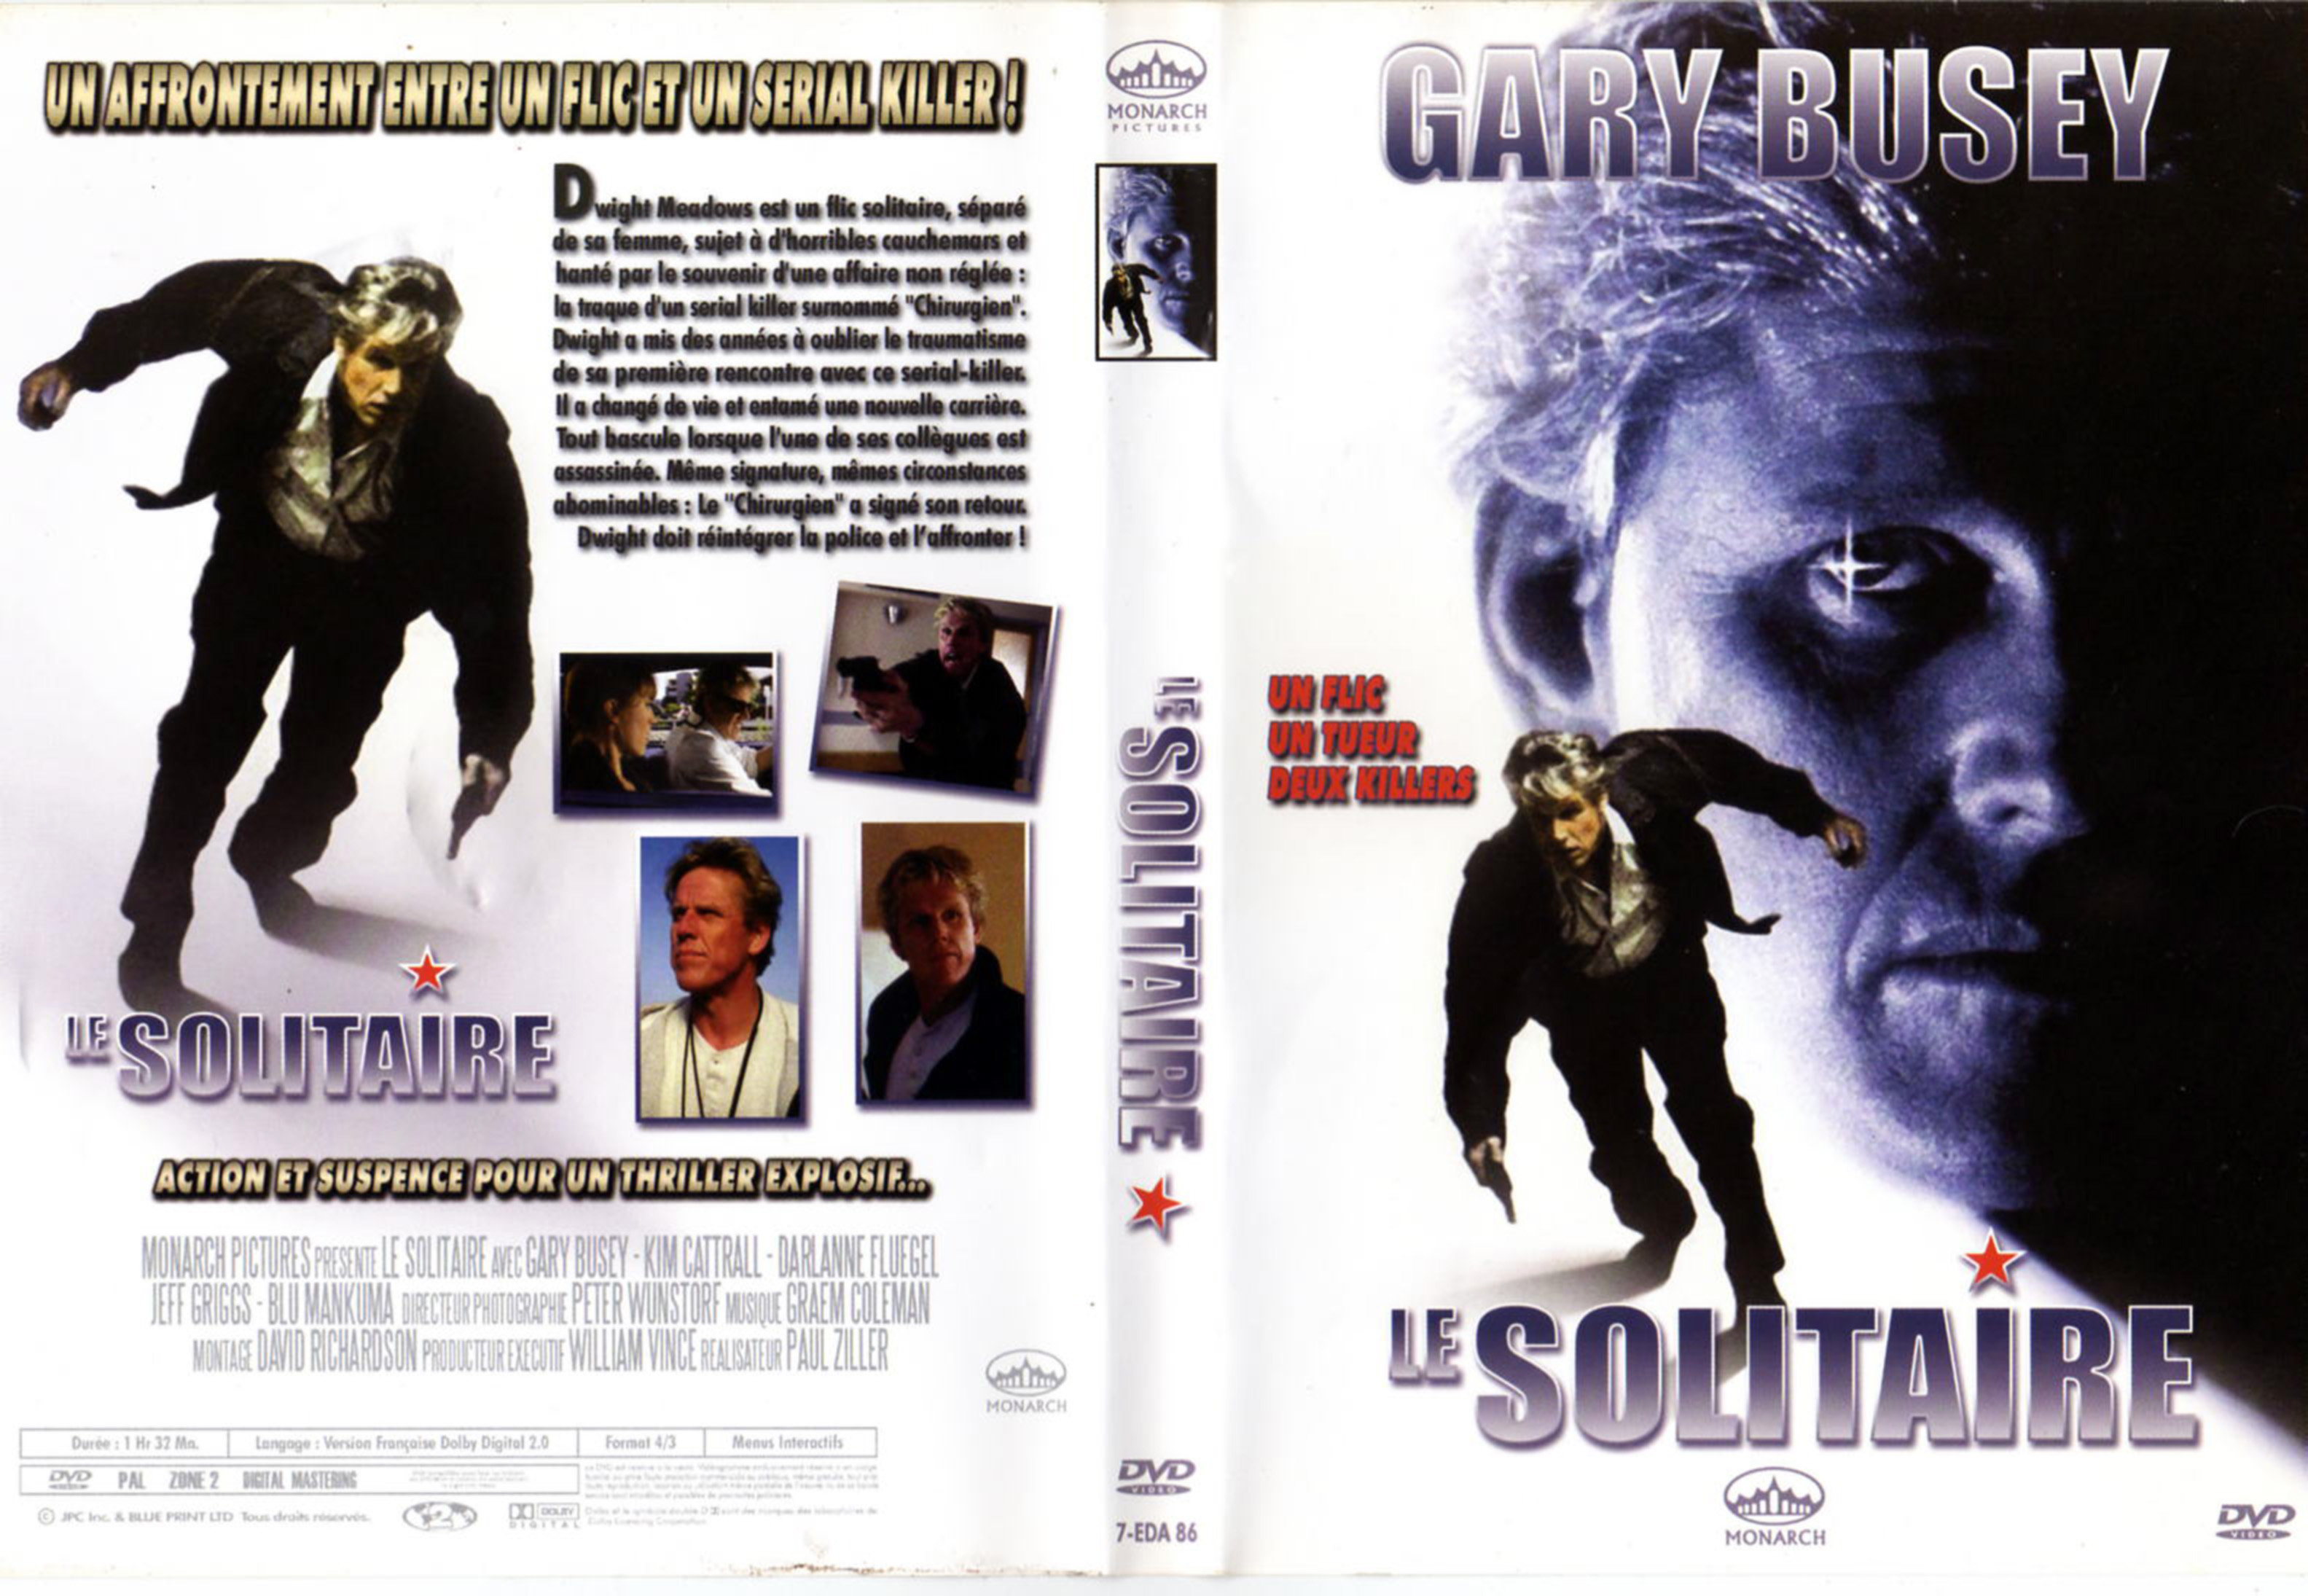 Jaquette DVD Le solitaire (Gary Busey)